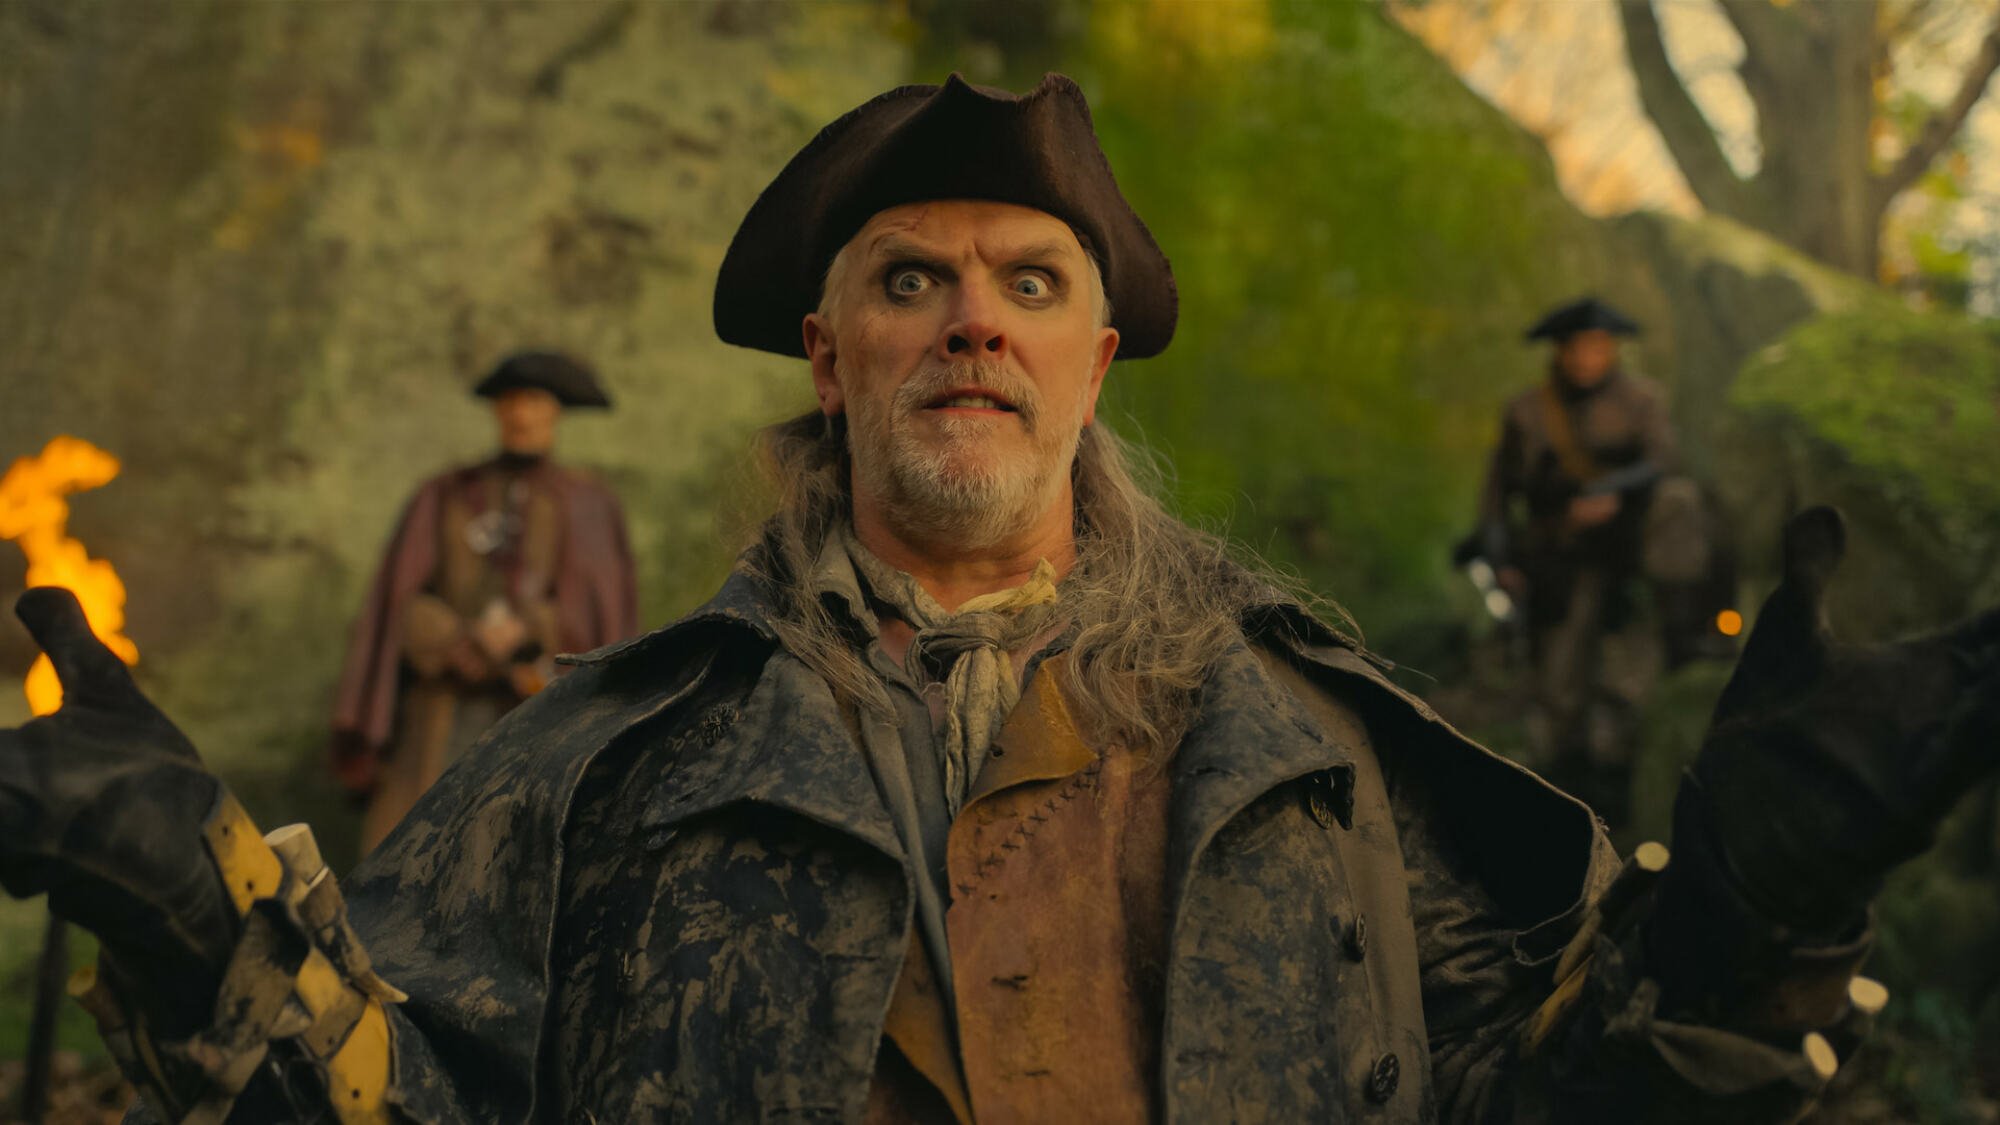 Greg Davies as an 18th century highwayman in "The Completely Made-Up Adventures of Dick Turpin".